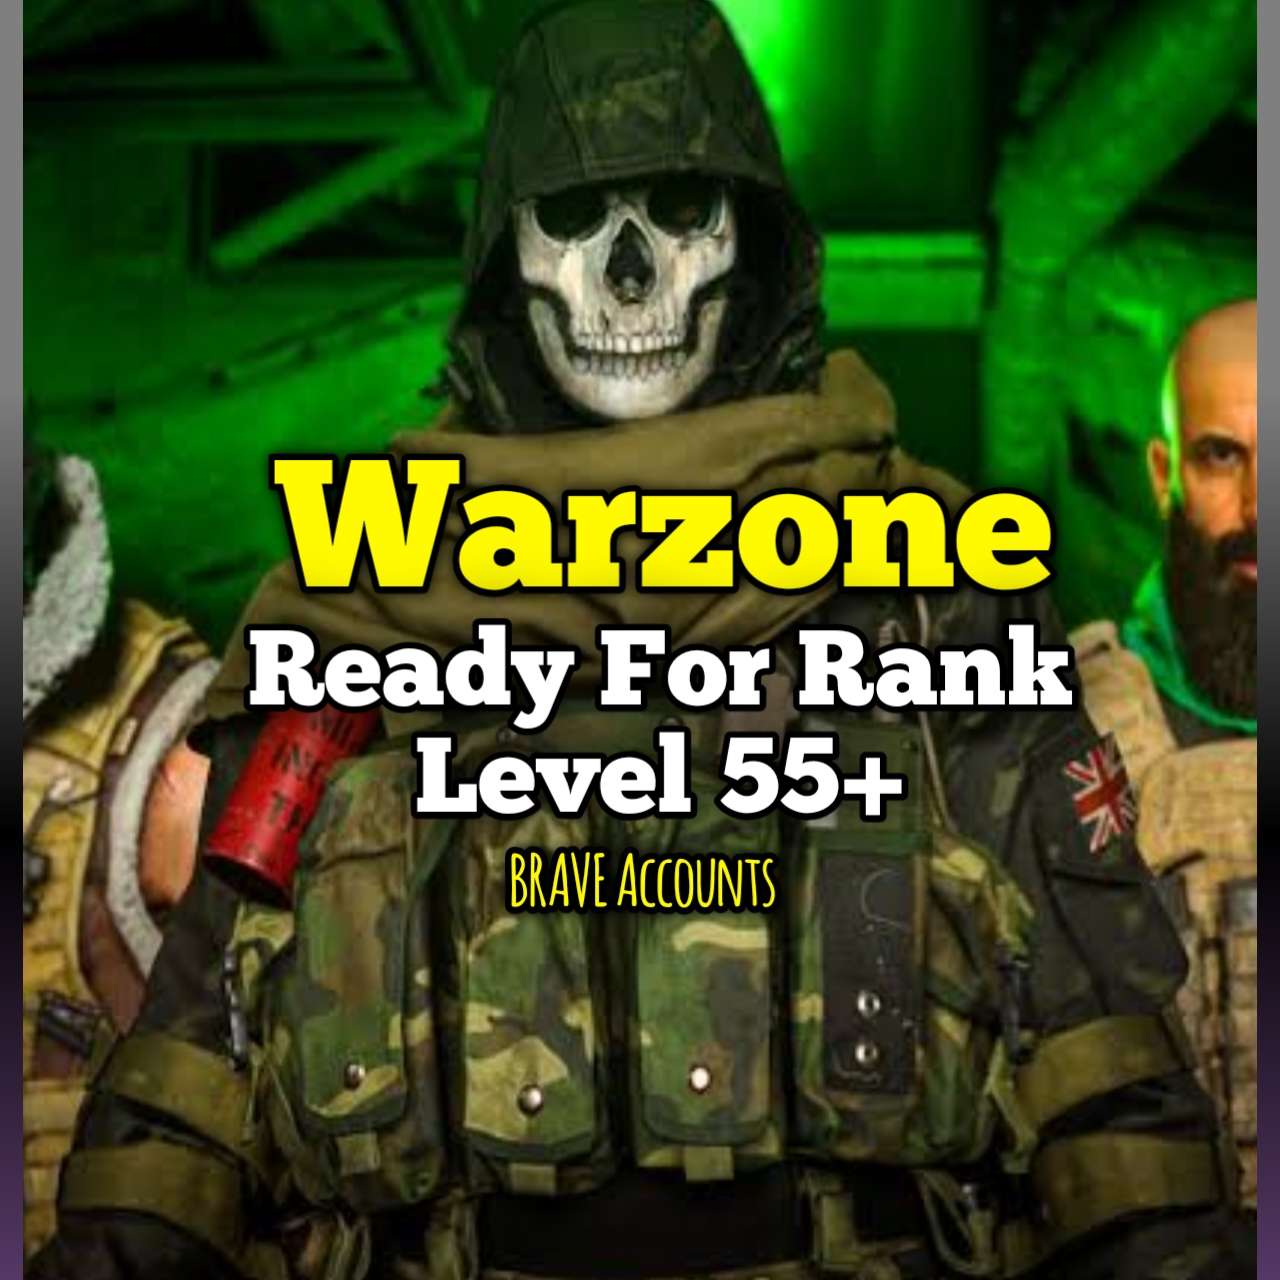 WARZONE RFR LEVEL 55 - Ready For Rank Warzone Account - Changeable mail and Name - Activation , Battlenet